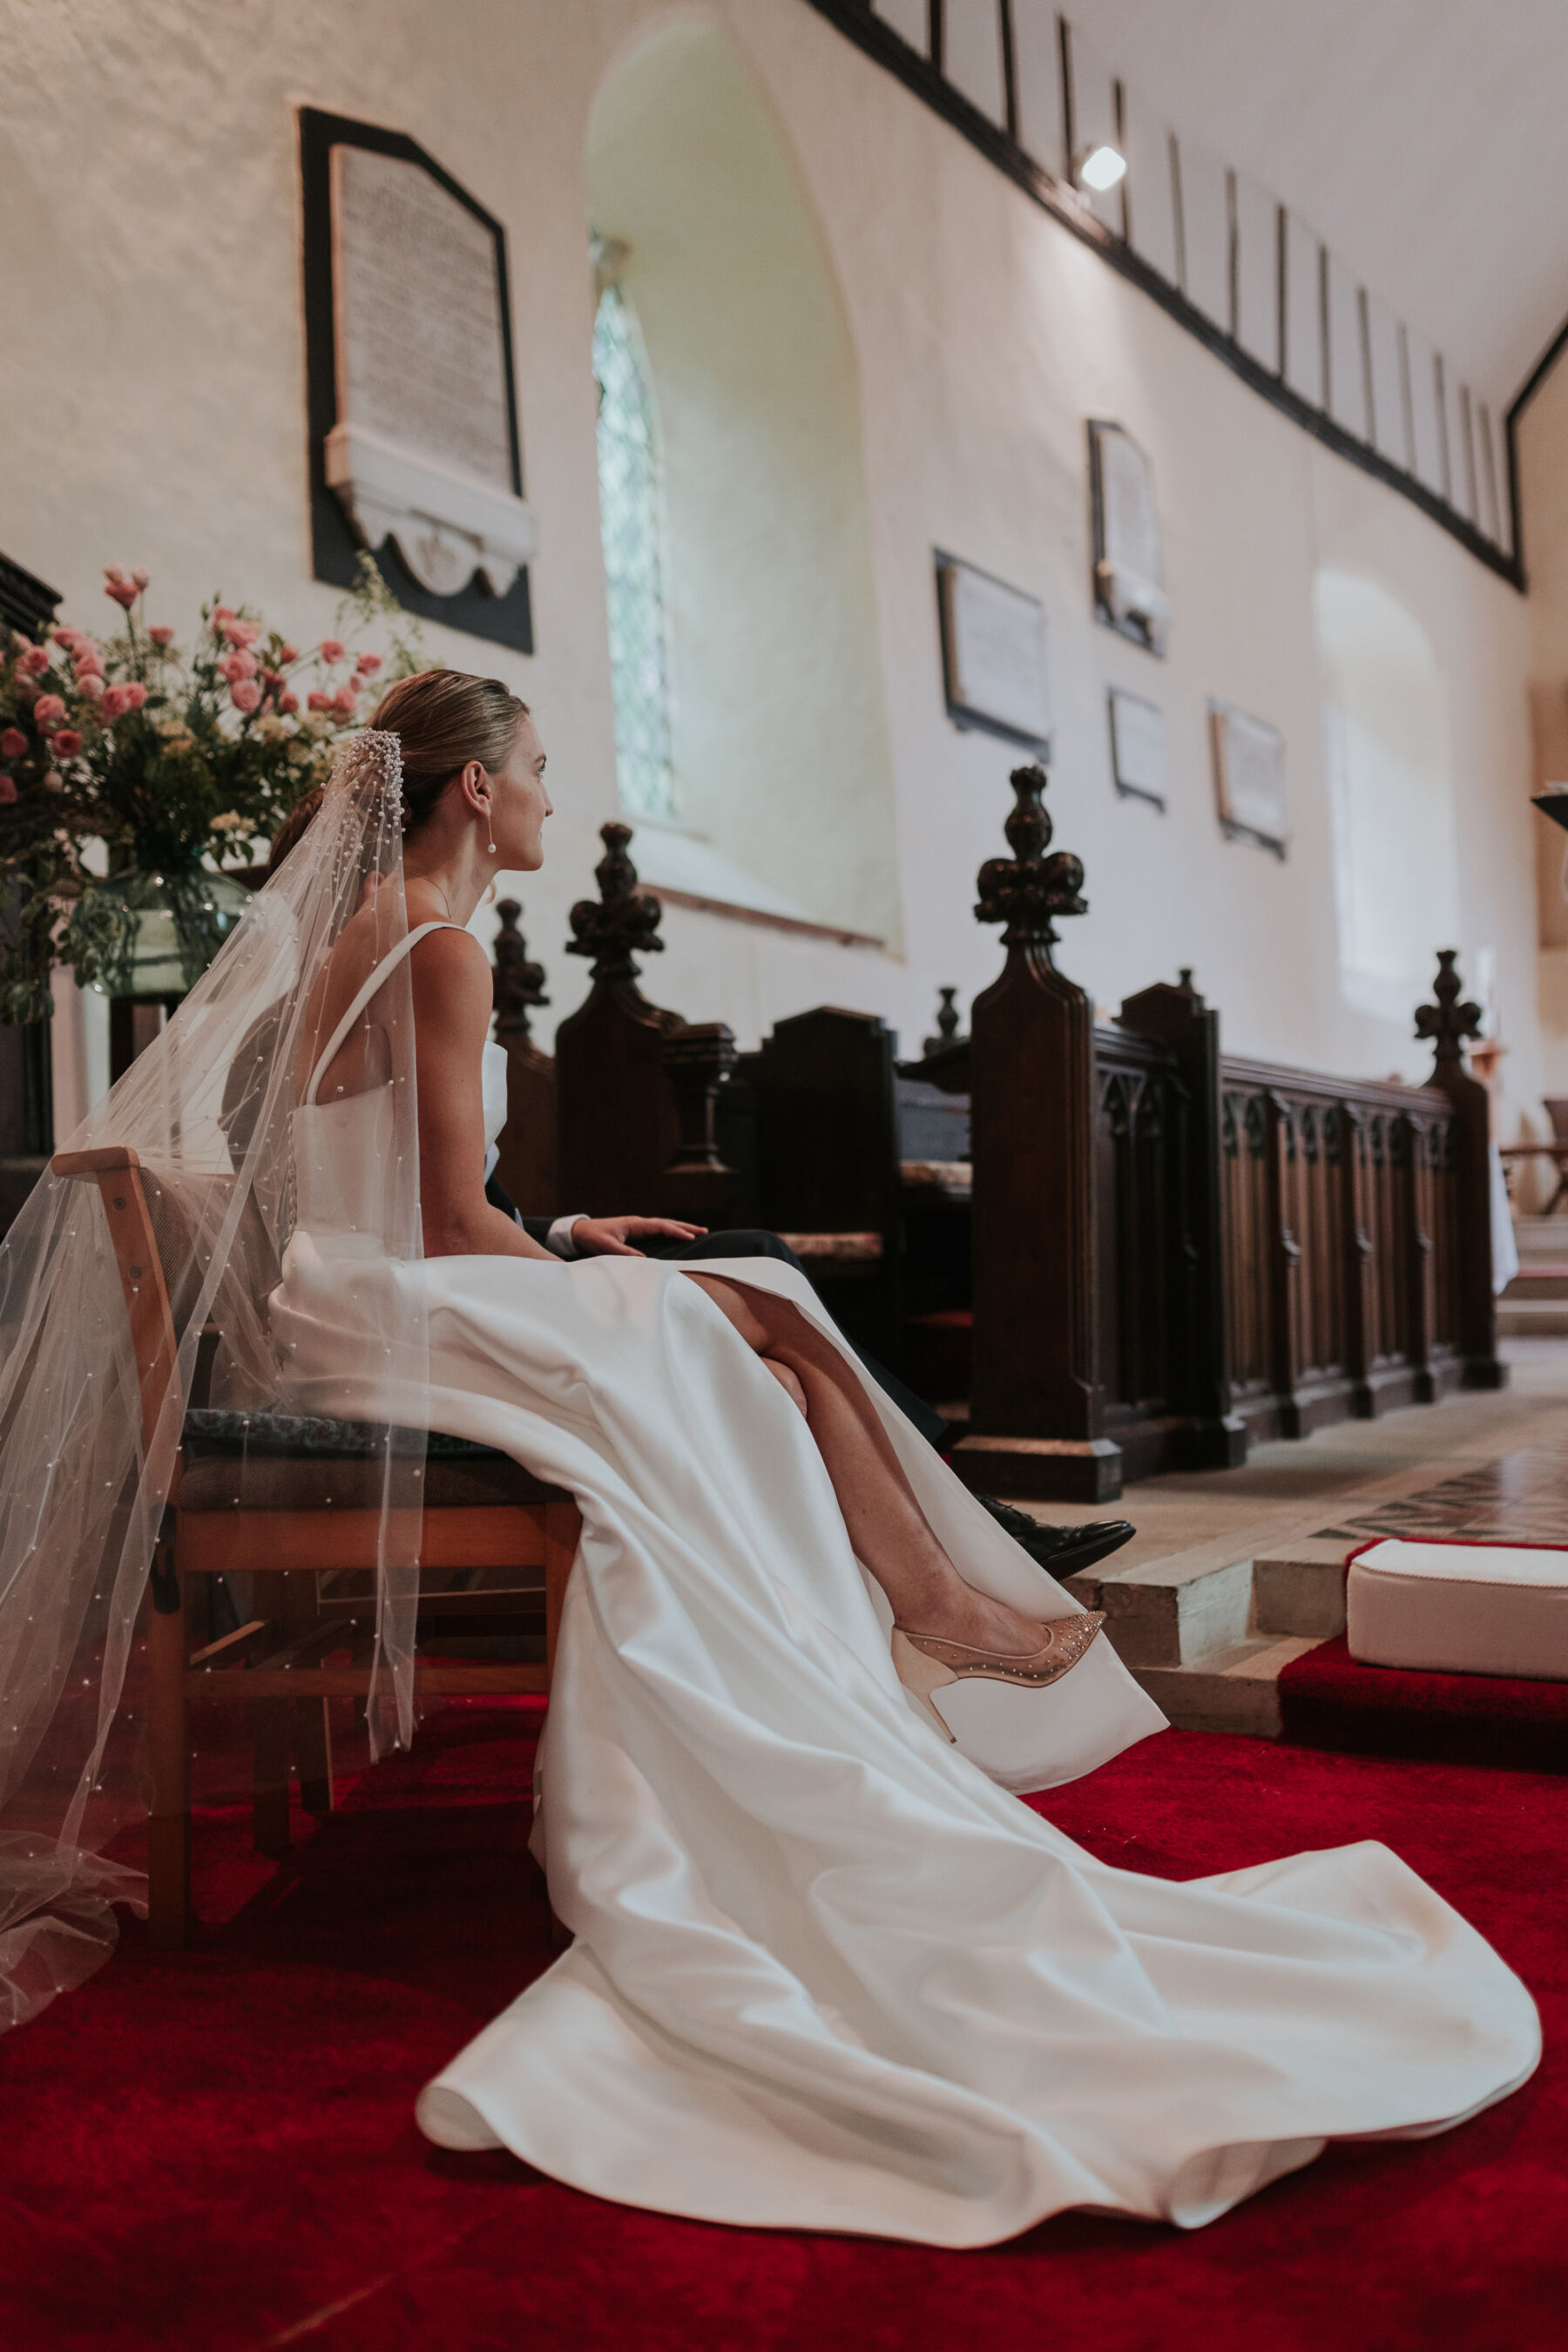 Bride with a polka dot veil and Khya dress with a side slit sat in church curing the ceremony.